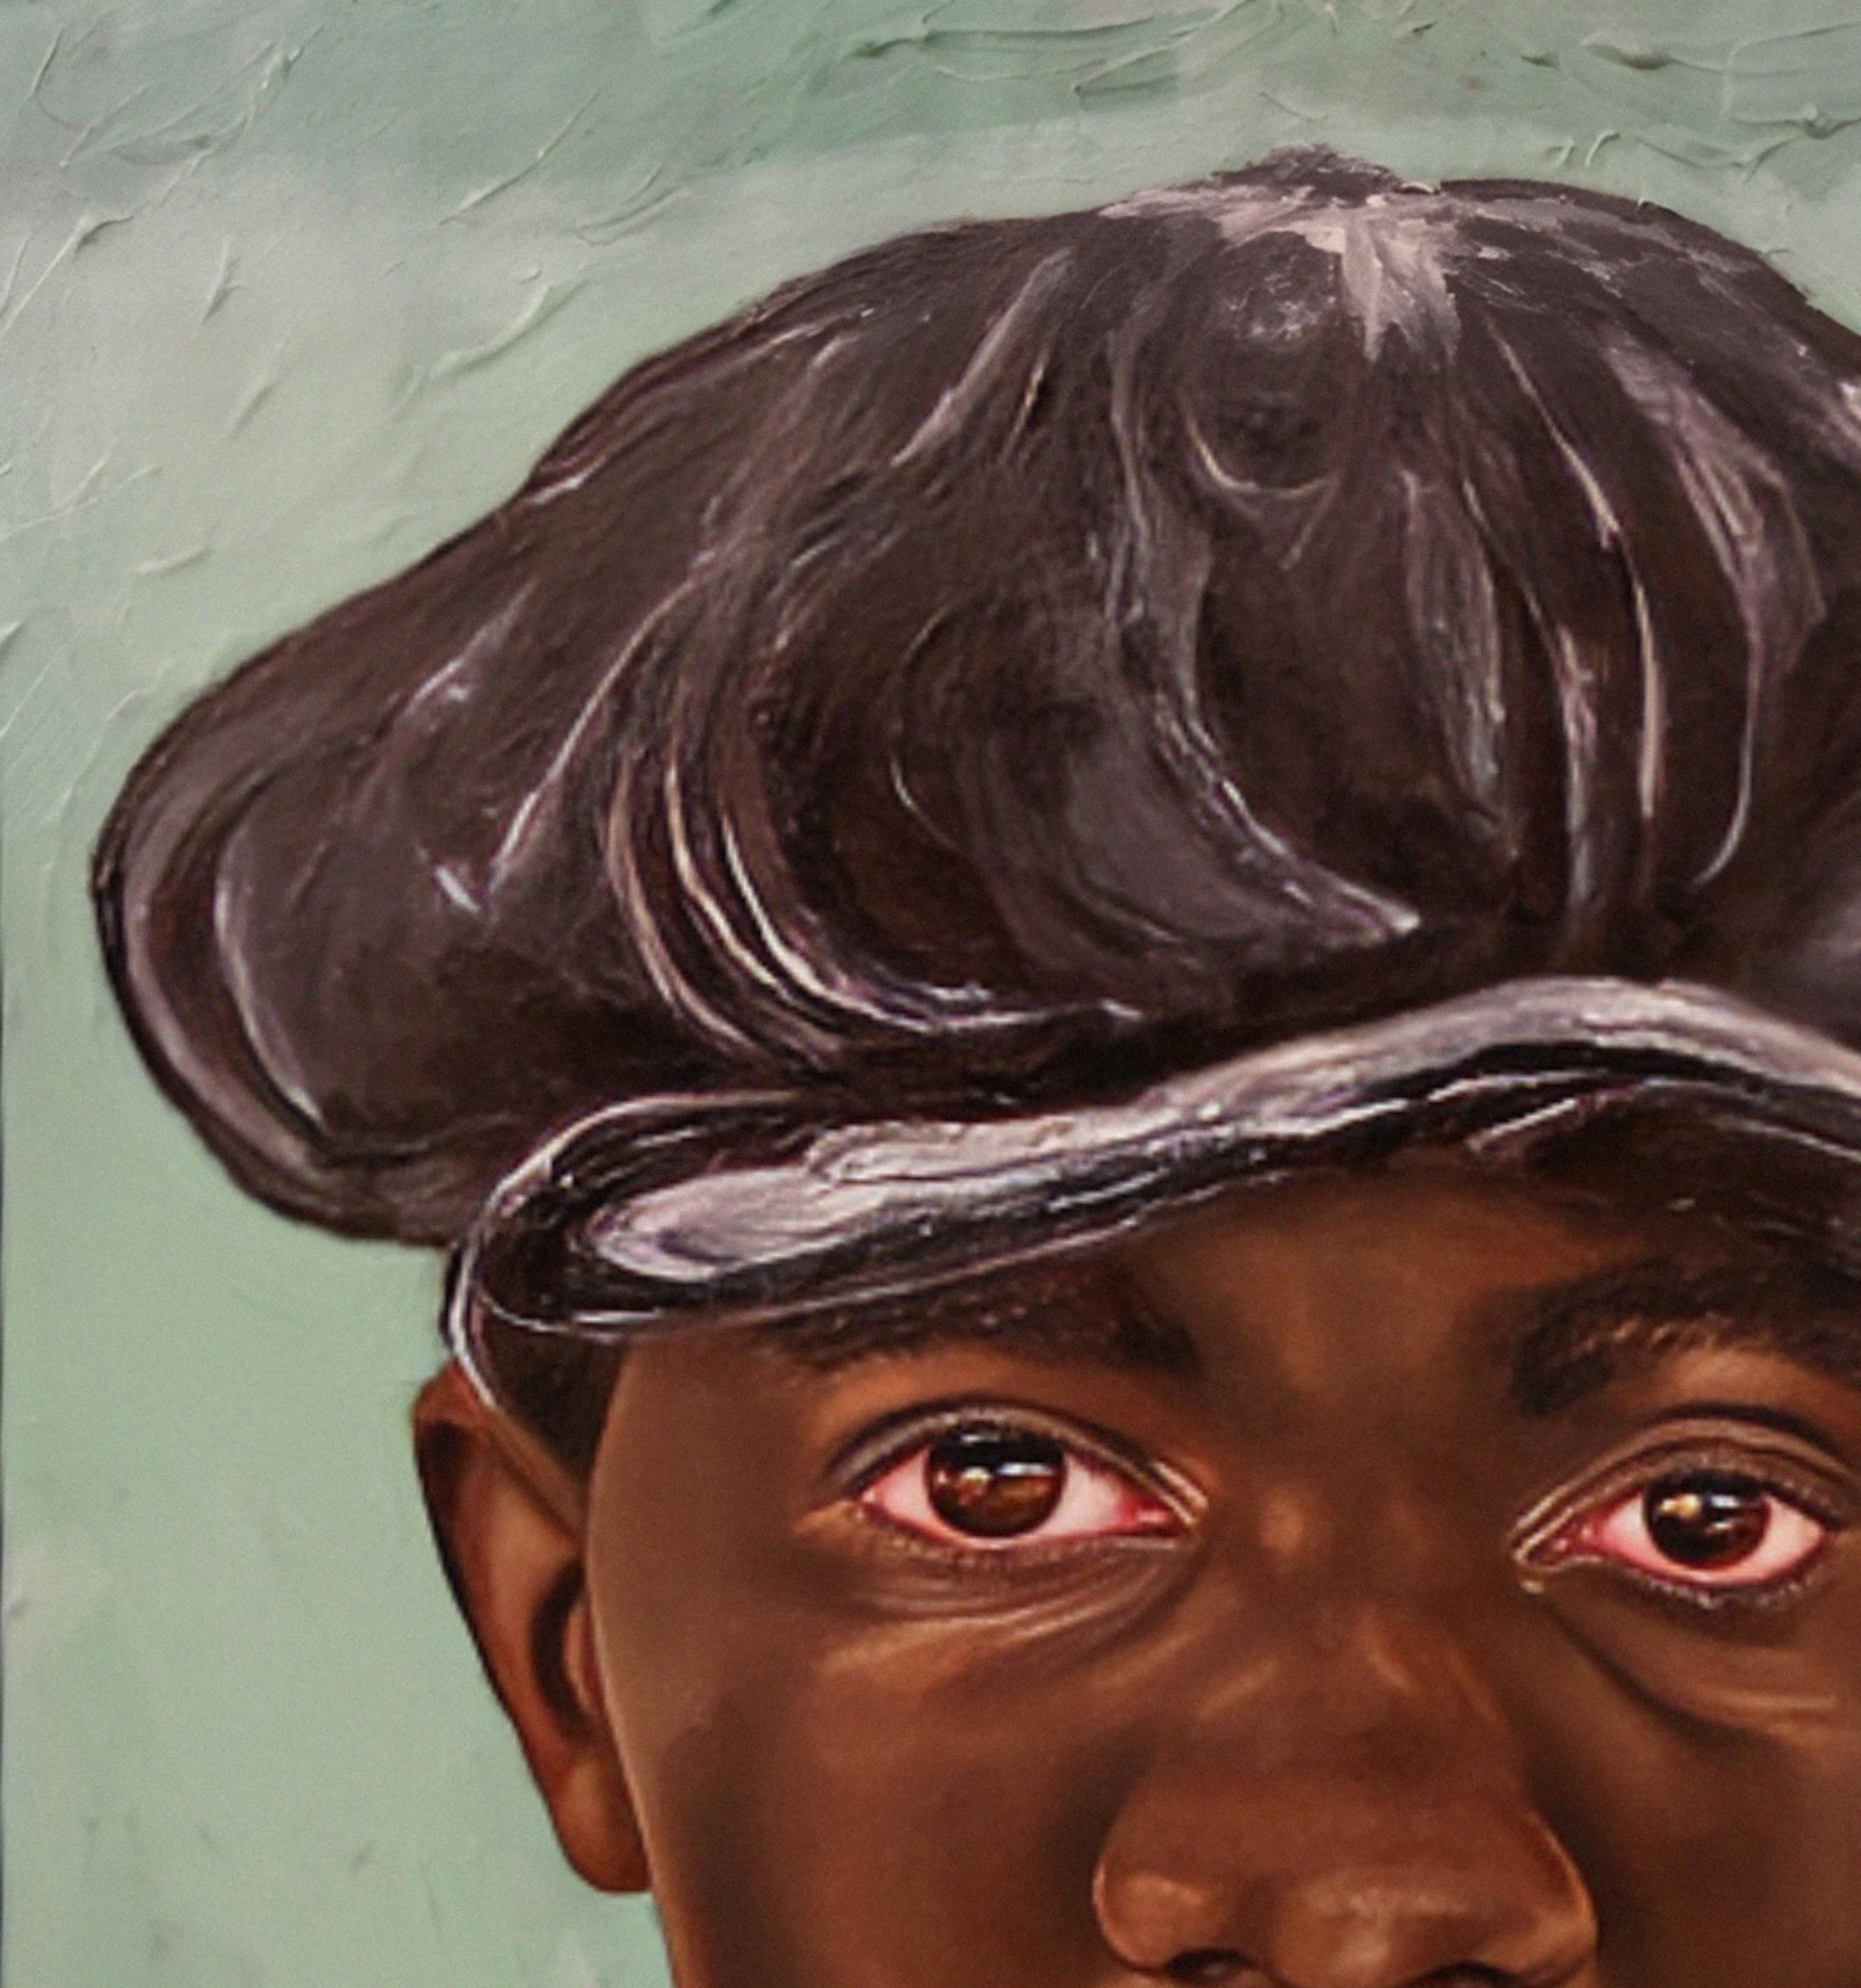 When We Were Young - Painting by Olaosun Oluwapelumi